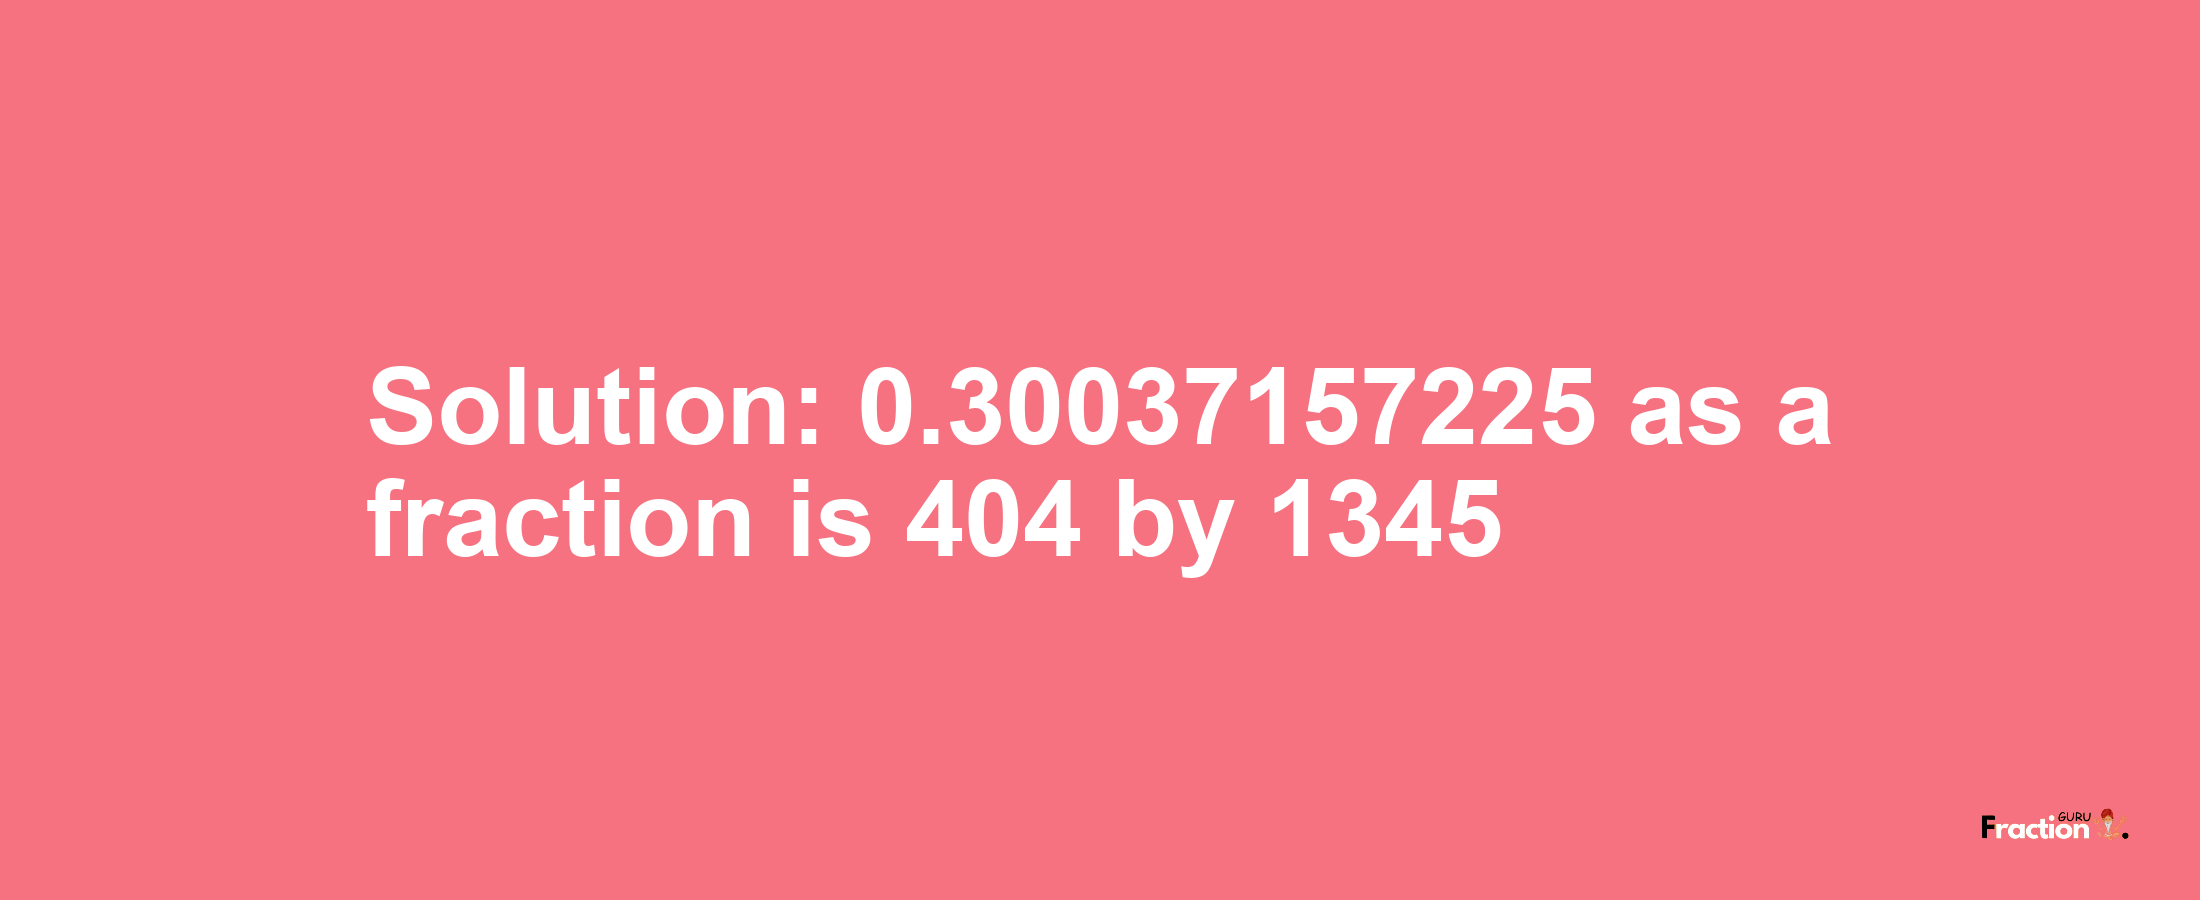 Solution:0.30037157225 as a fraction is 404/1345